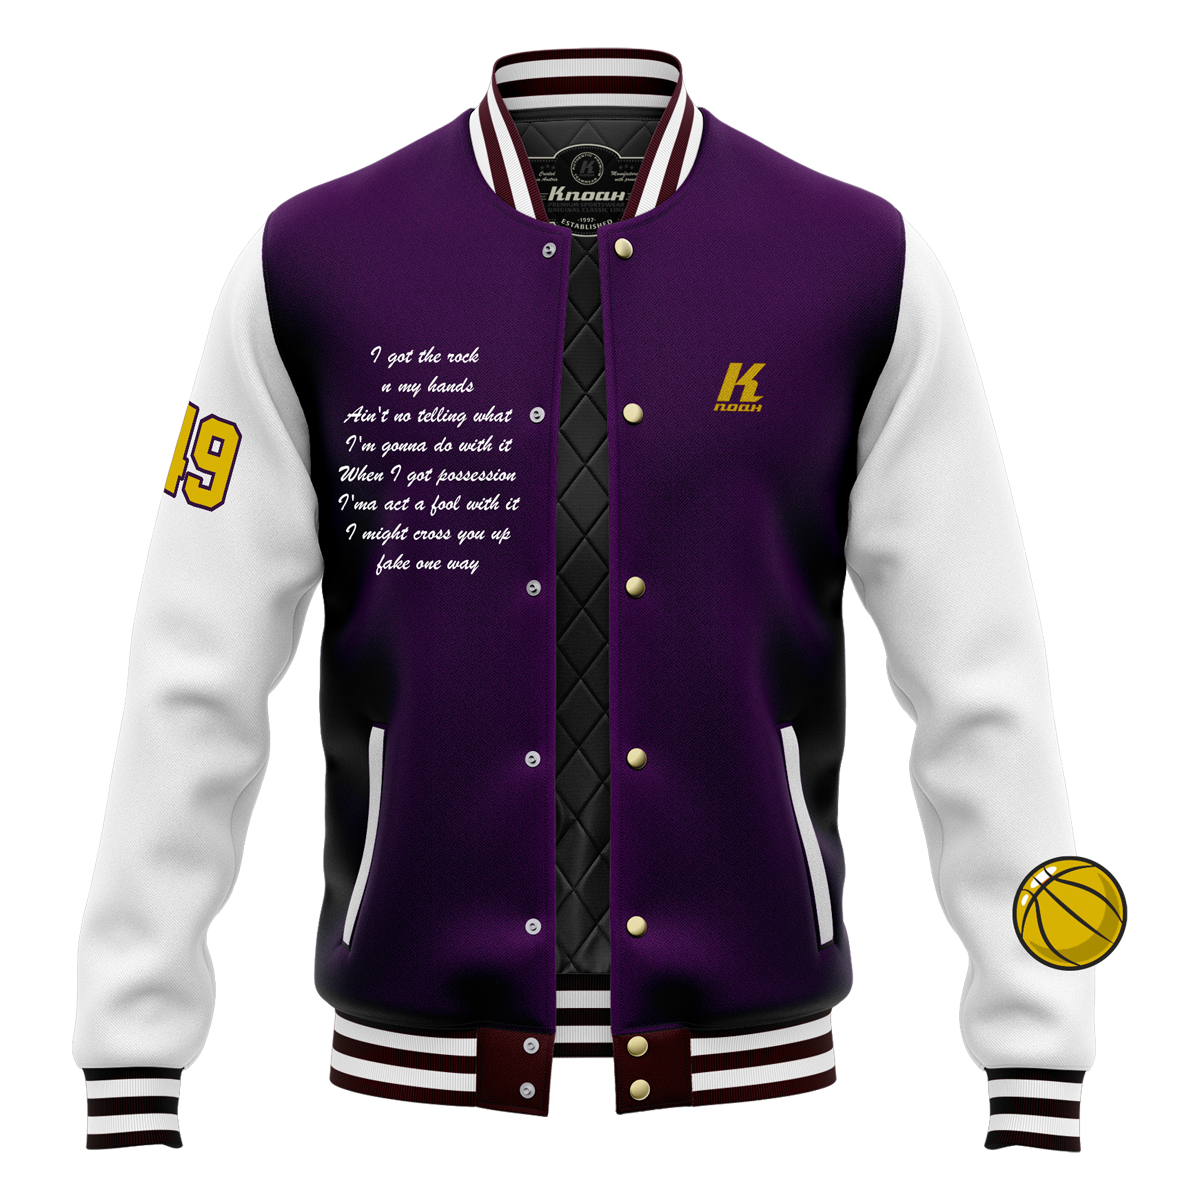 Day 10: "Slamdunk" Authentic Varsity Jacket with Playernumber/Initials